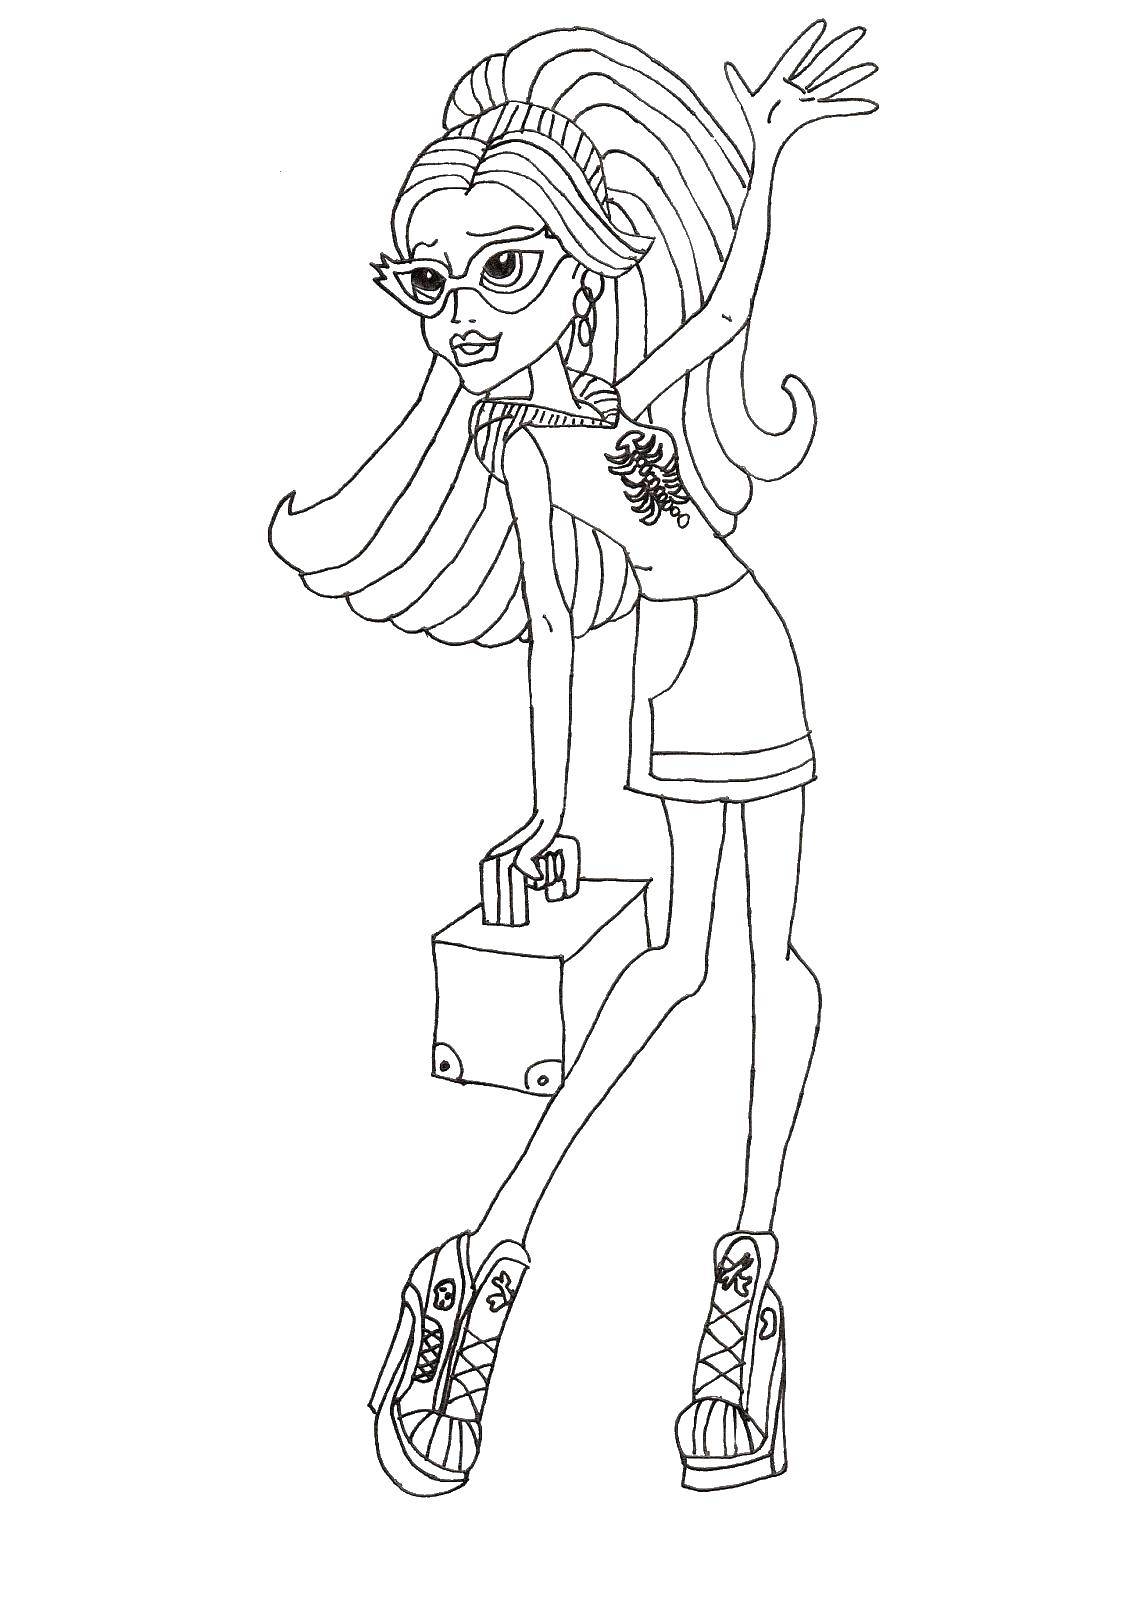 Coloring Ghoulia, yelps zombies. Category Monster high. Tags:  Yelps, ghoulia, a zombie, Monster high.